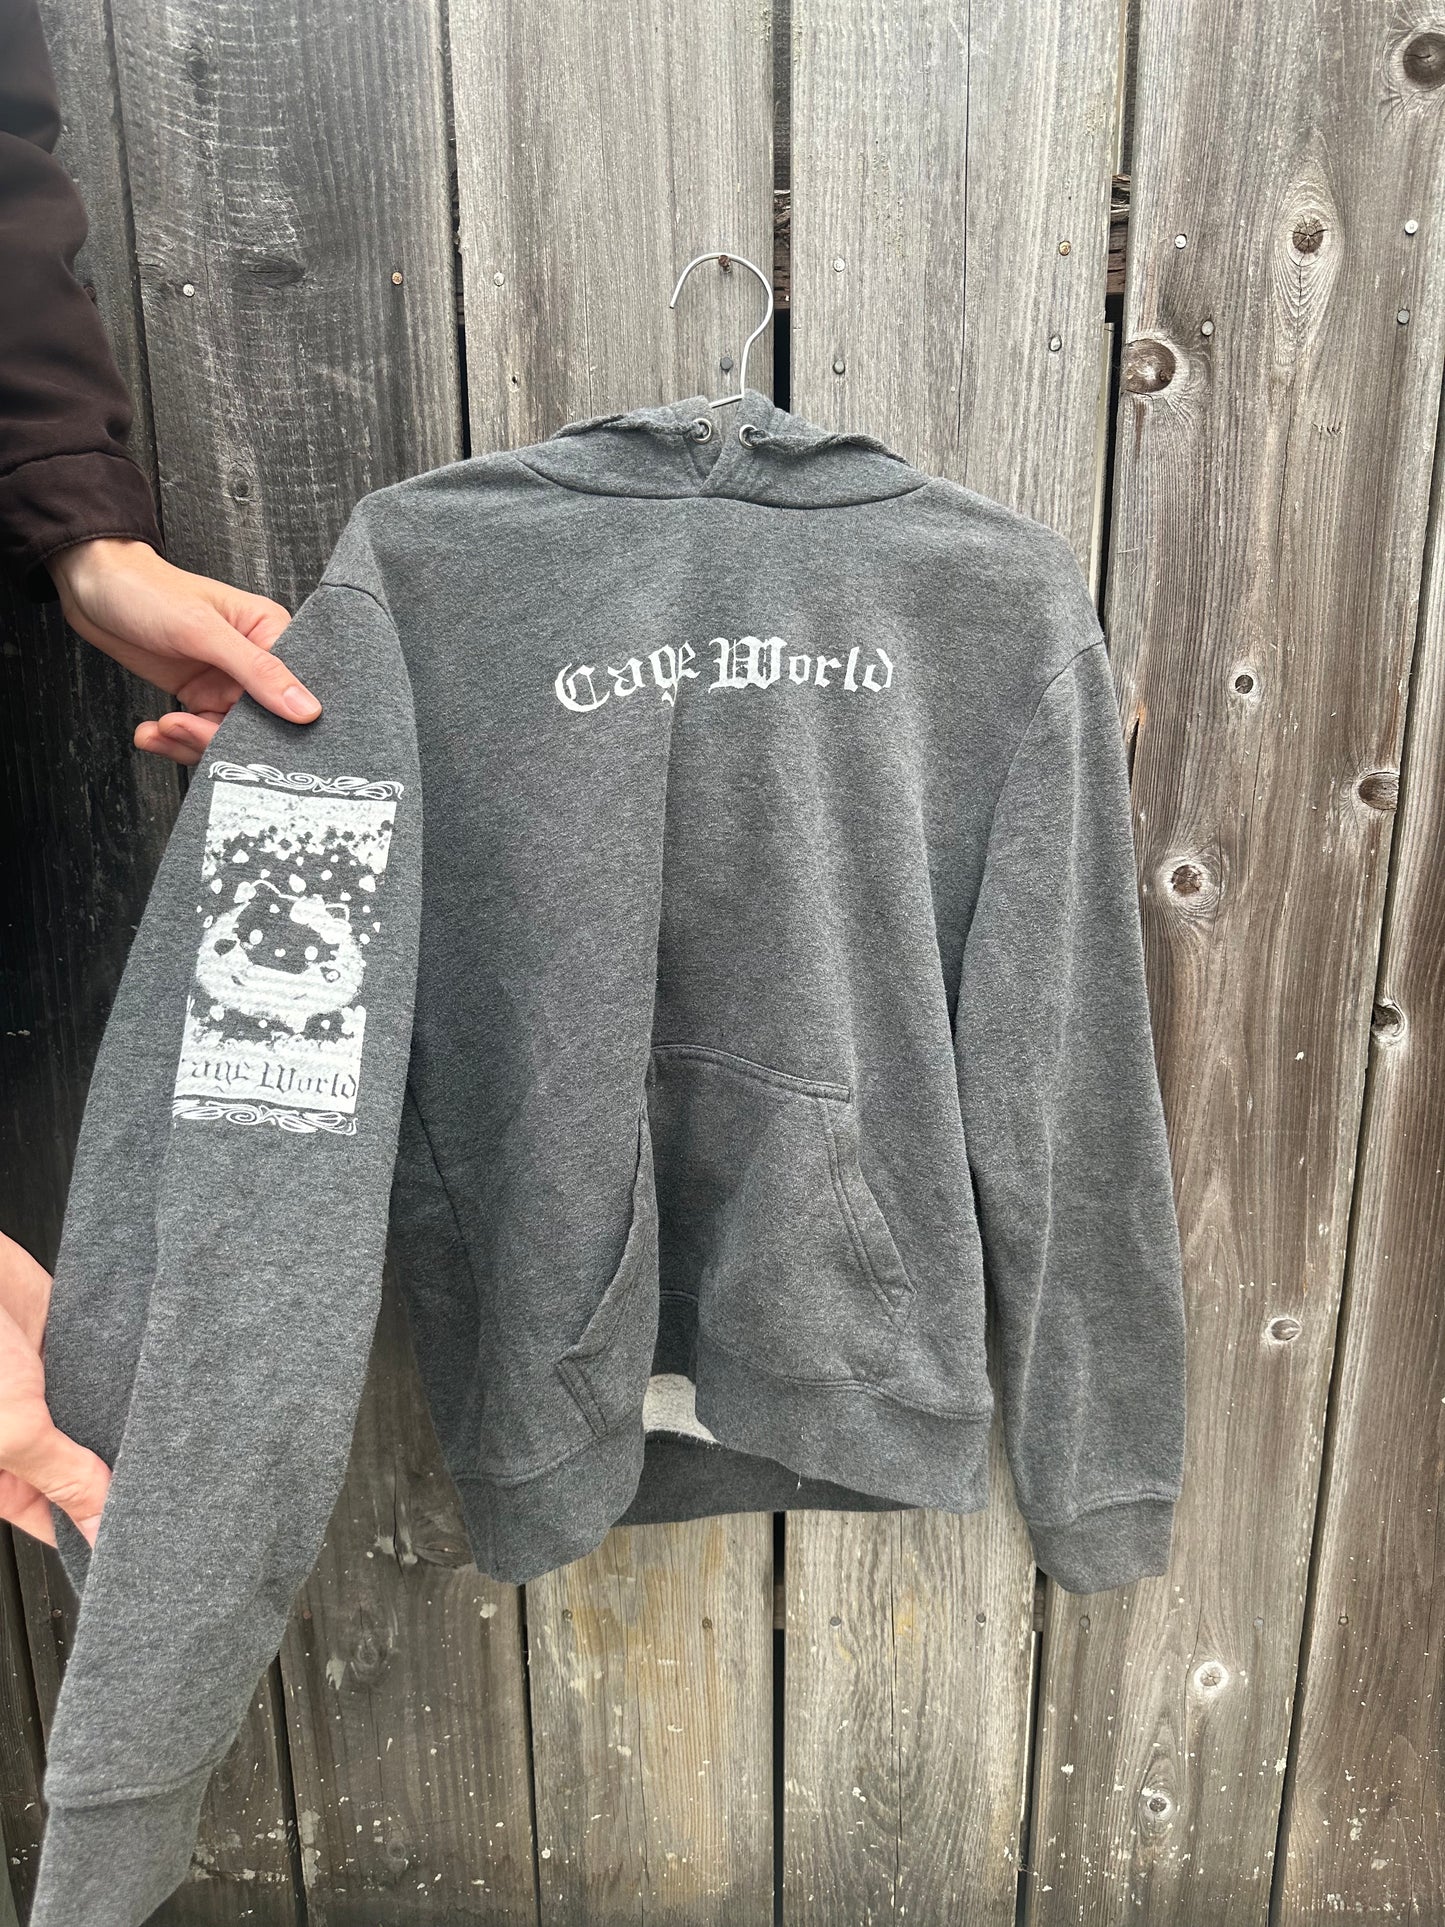 cage world hoodie